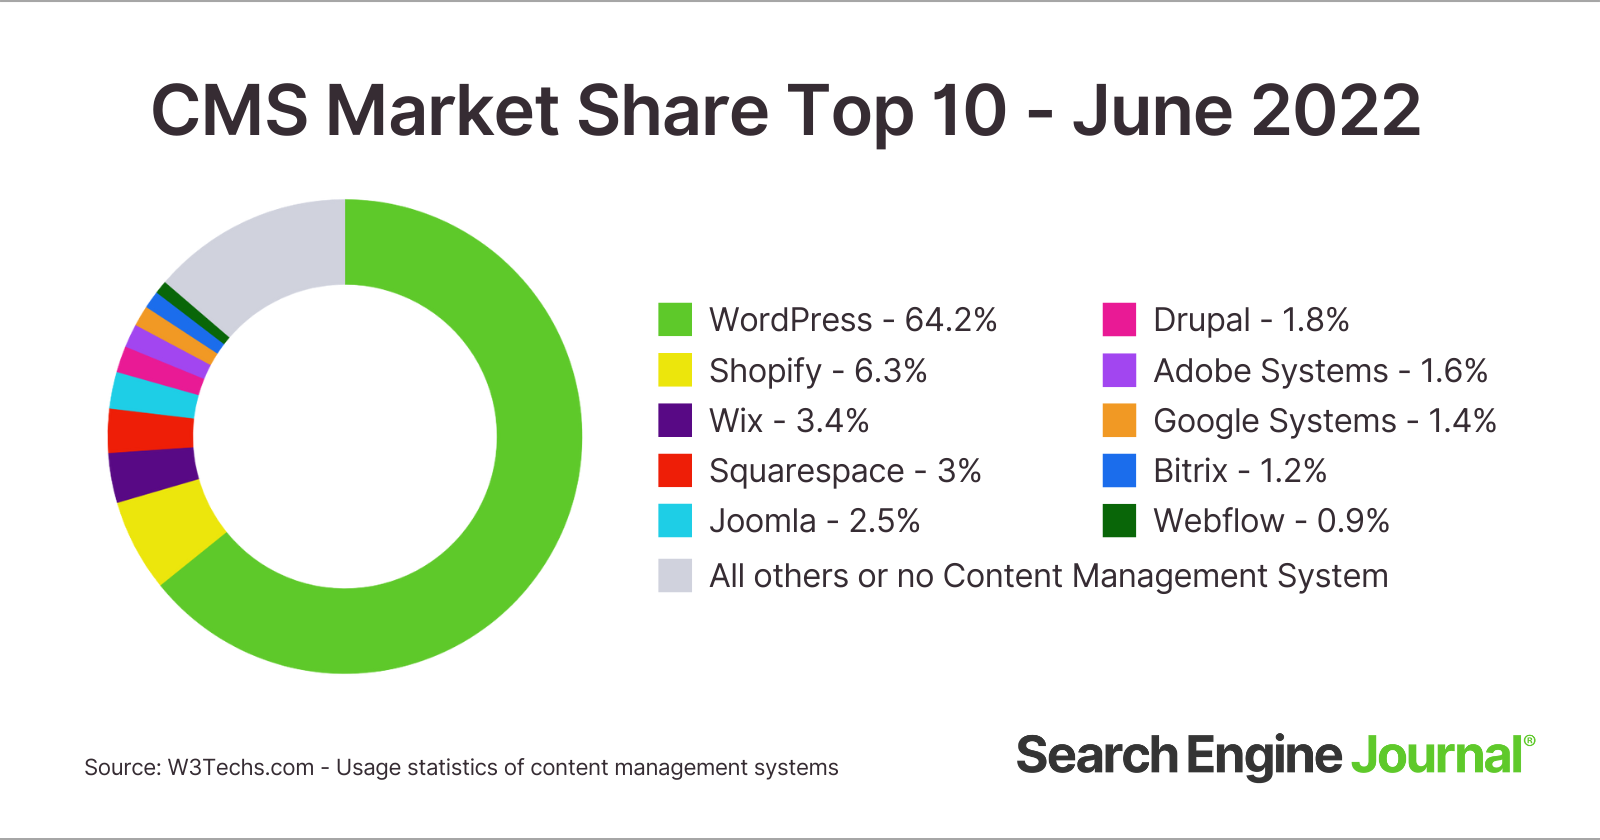 Top 10 content management systems market share as of June 2022.